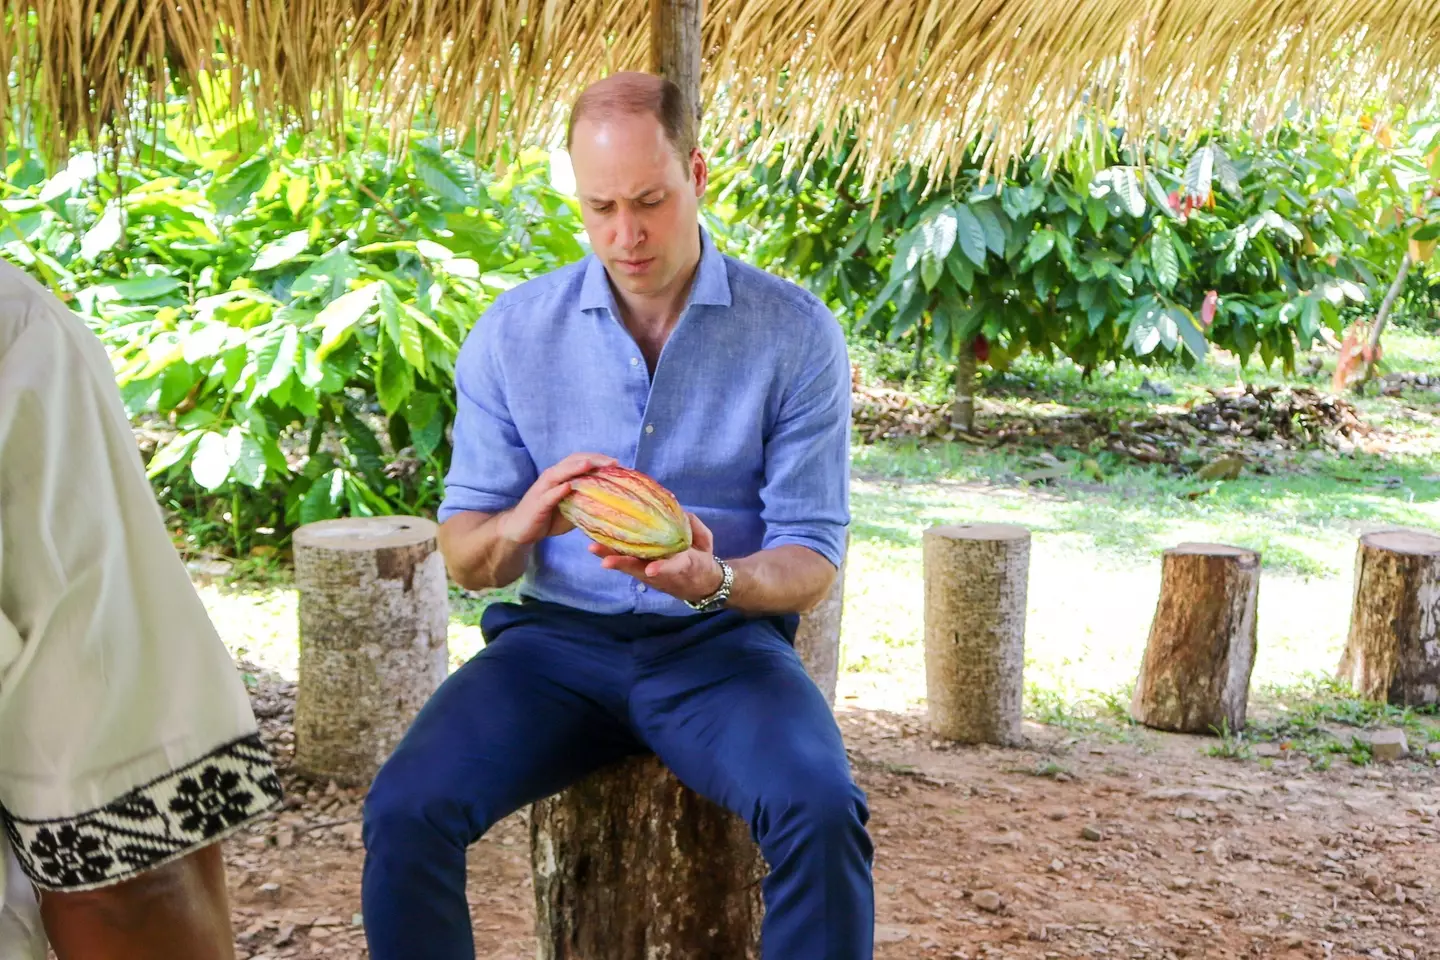 Prince William at Che'il Cacao Farm and Chocolate Factory (